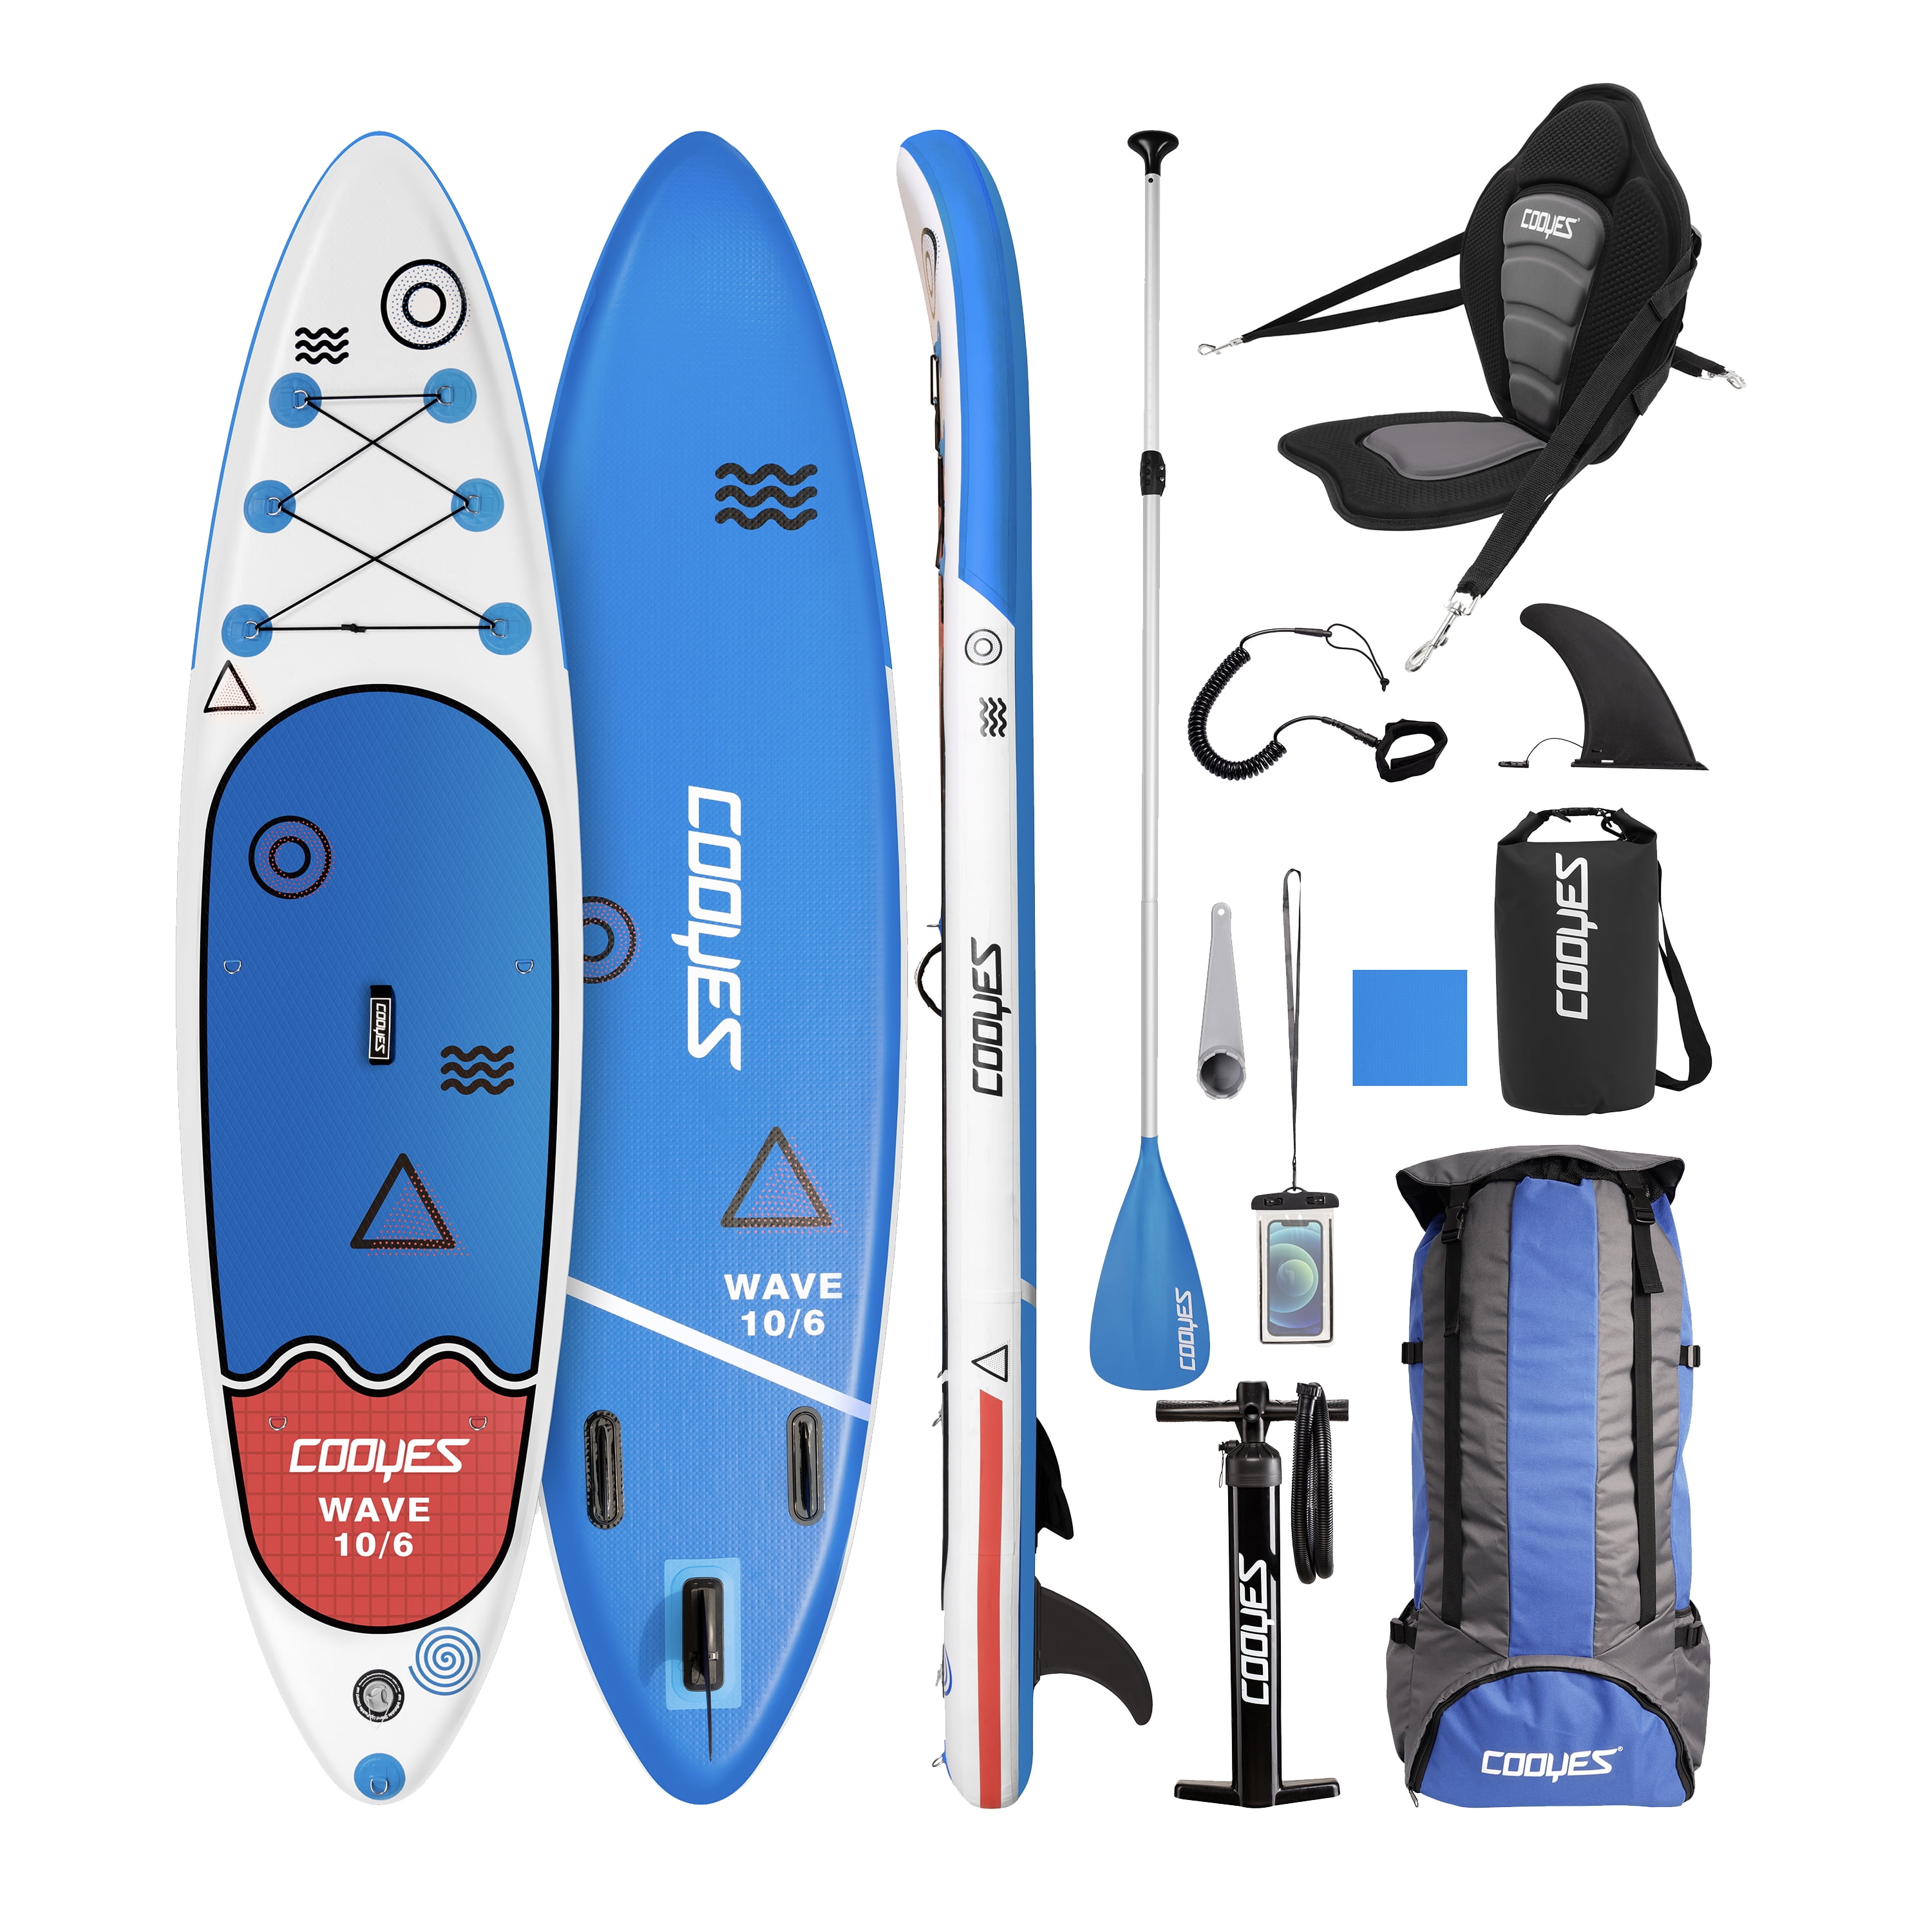 Surf Boards with Travel Backpack,Adjustable Paddle,Pump,Waterproof Bag,All Accessories for Youth & Adult & Kids Inflatable Stand Up Paddleboards 10.5ft x 33 x6 SUP Package